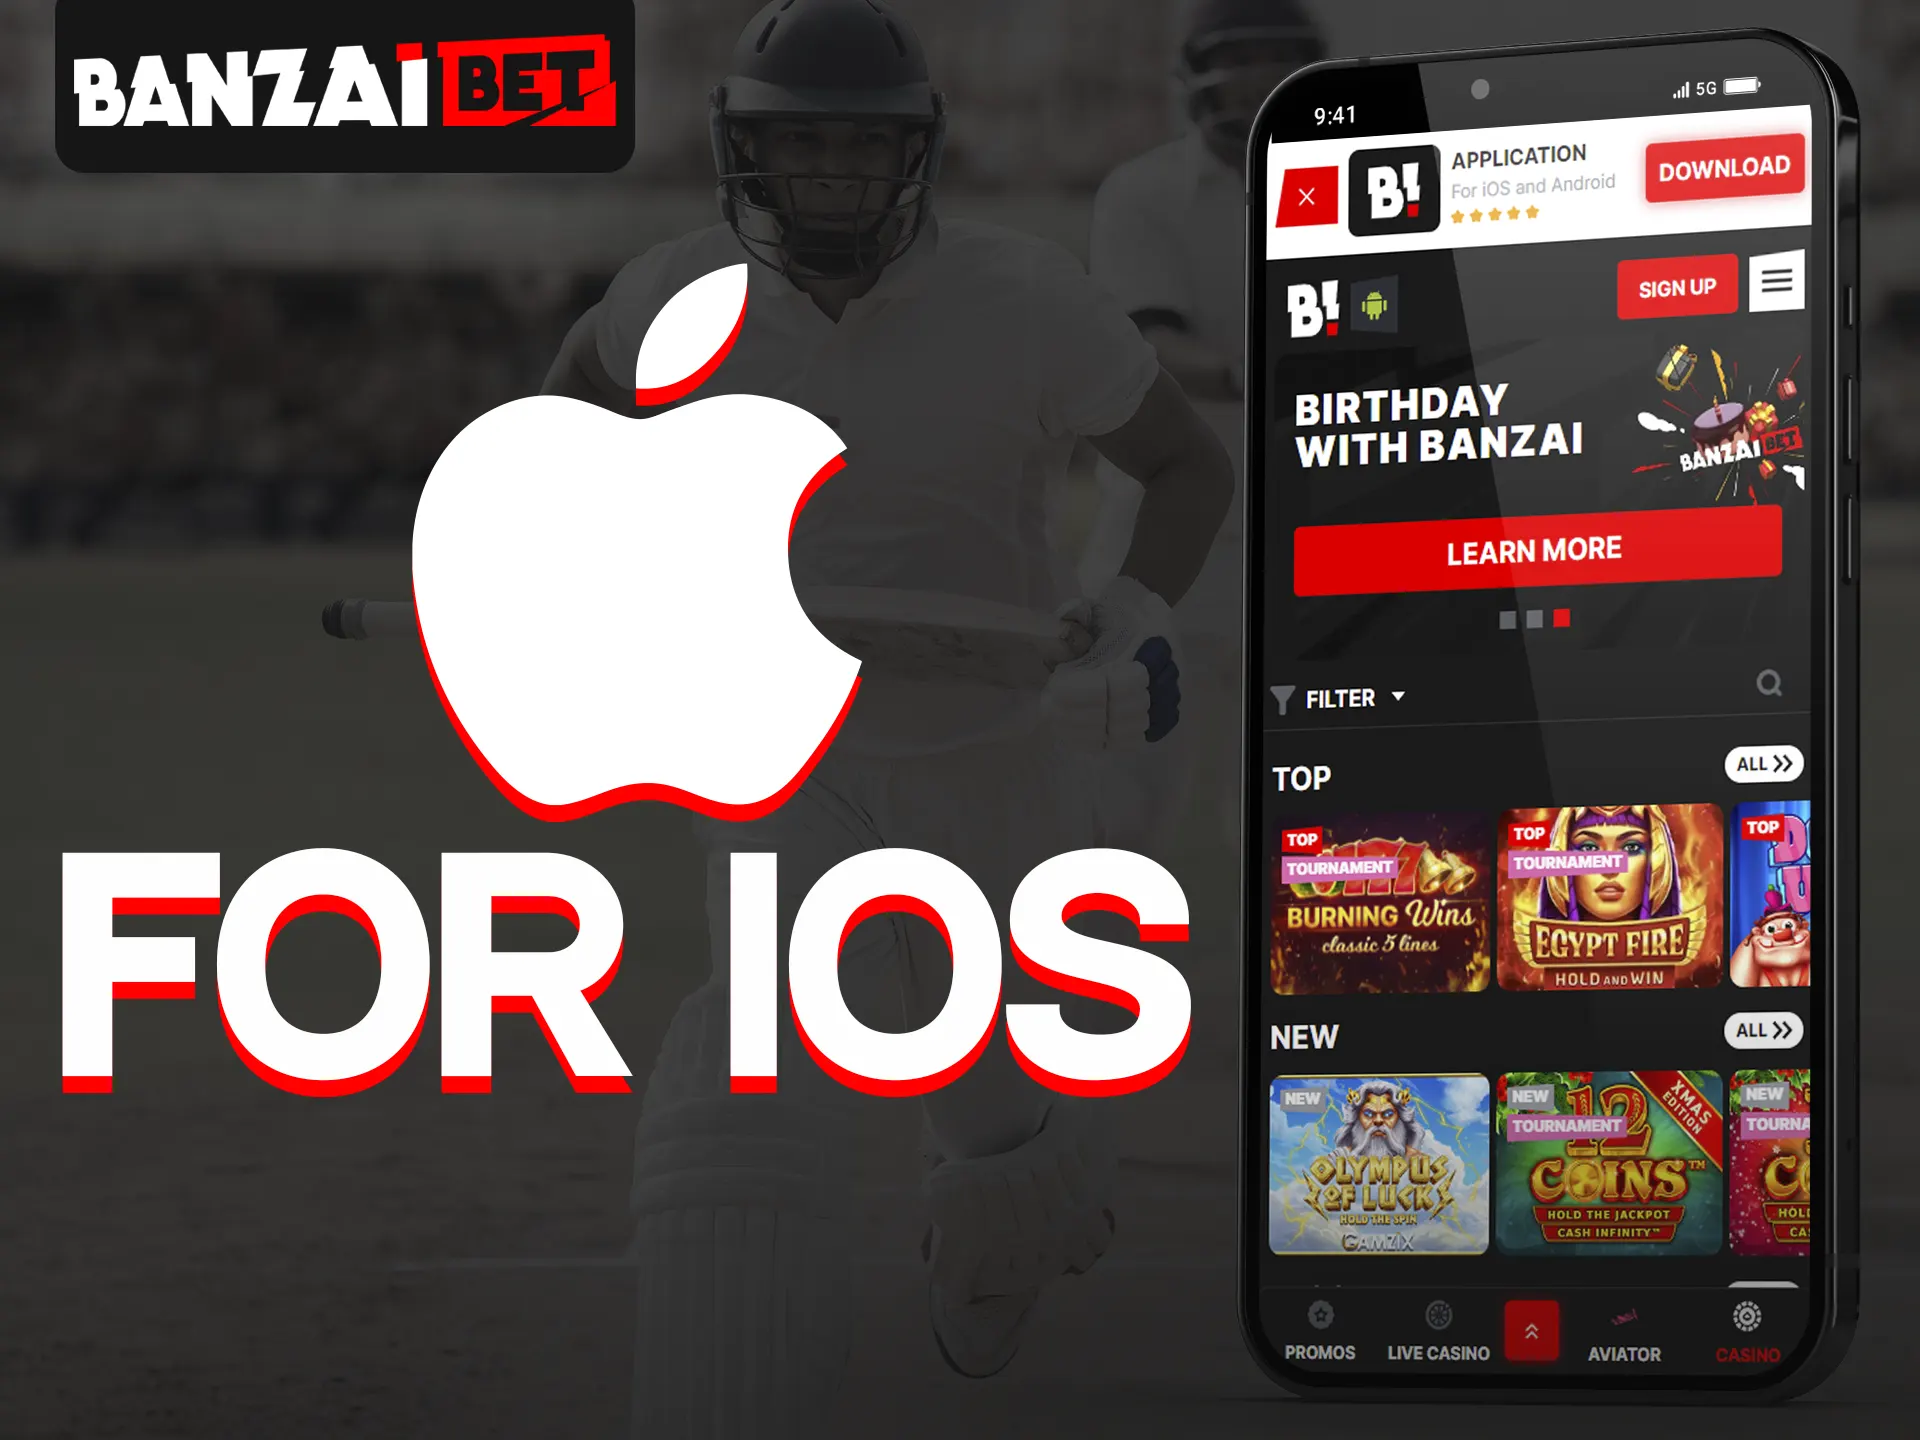 Install the Banzai Bet mobile app on your iOS device.